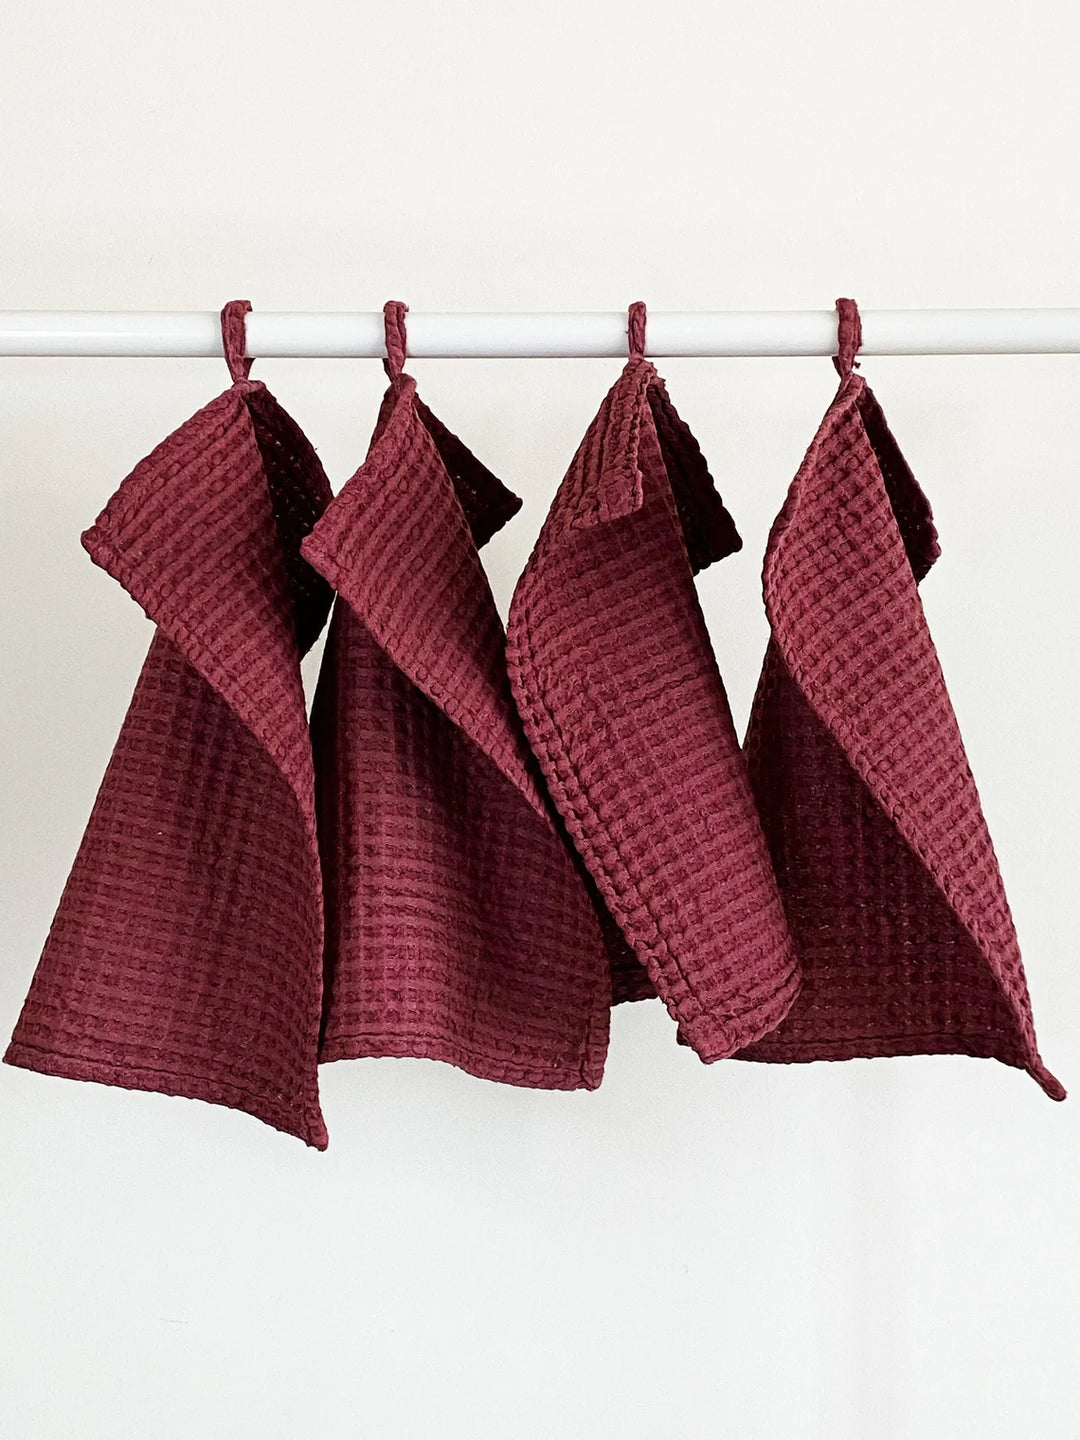 Linen Waffle Face Cloth Towels Set Of 4 In Red Wine Color - Daily Linen